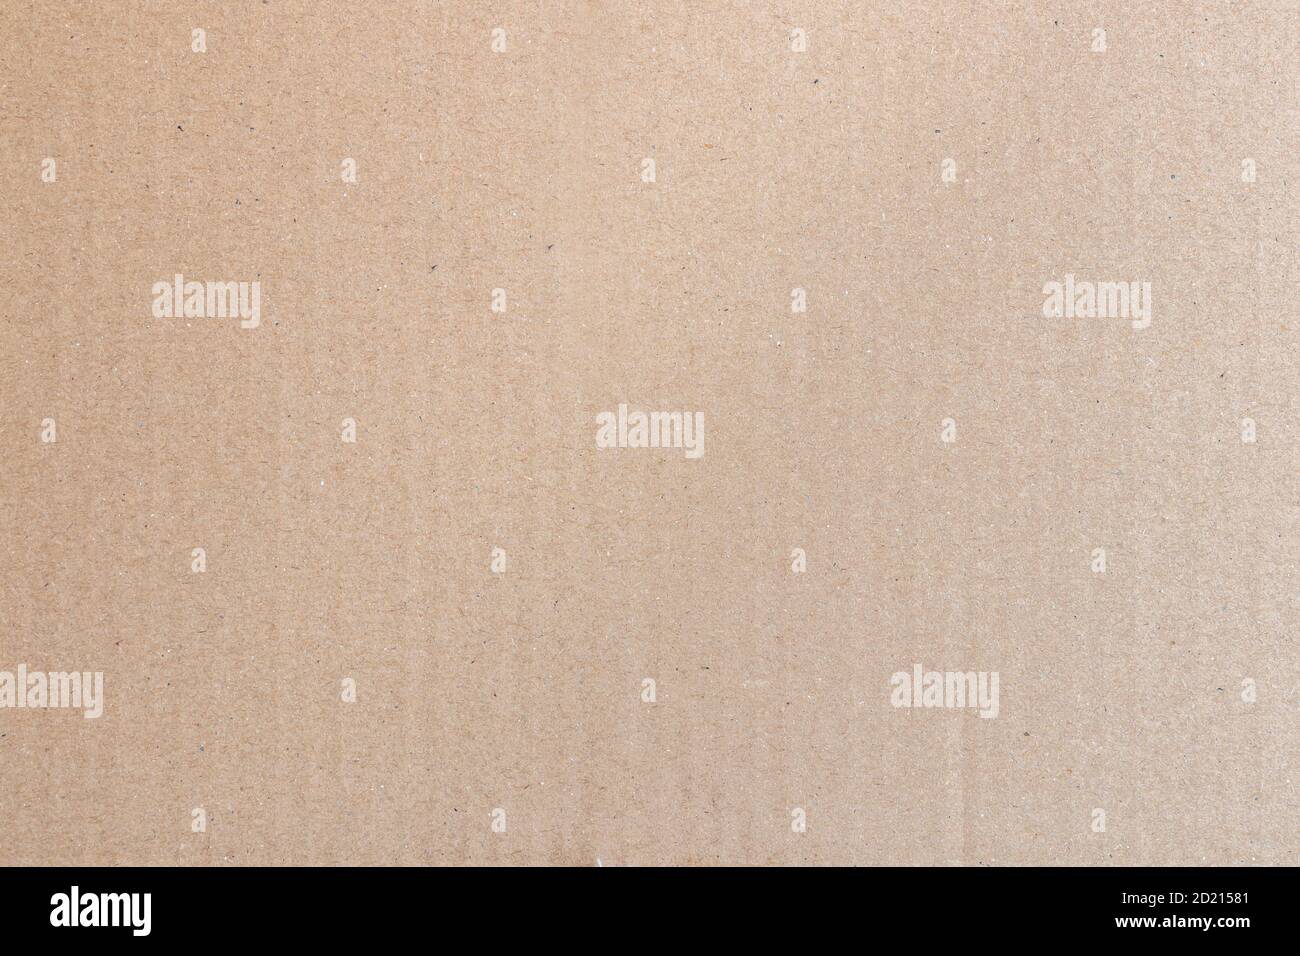 Cardboard sheet of paper, texture background Stock Photo